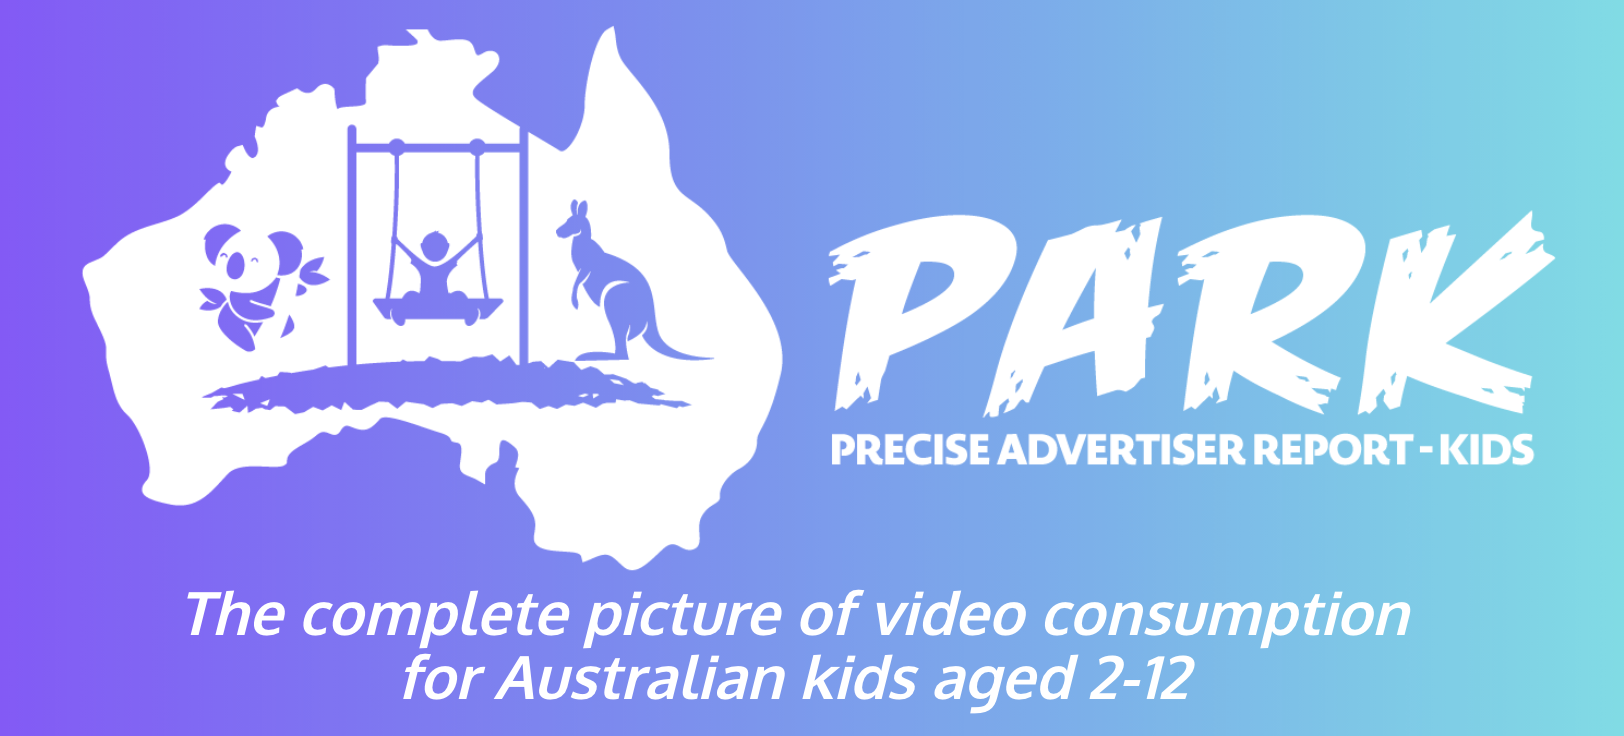 PARK AUS: YouTube is the go-to platform for 9 out of 10 kids!